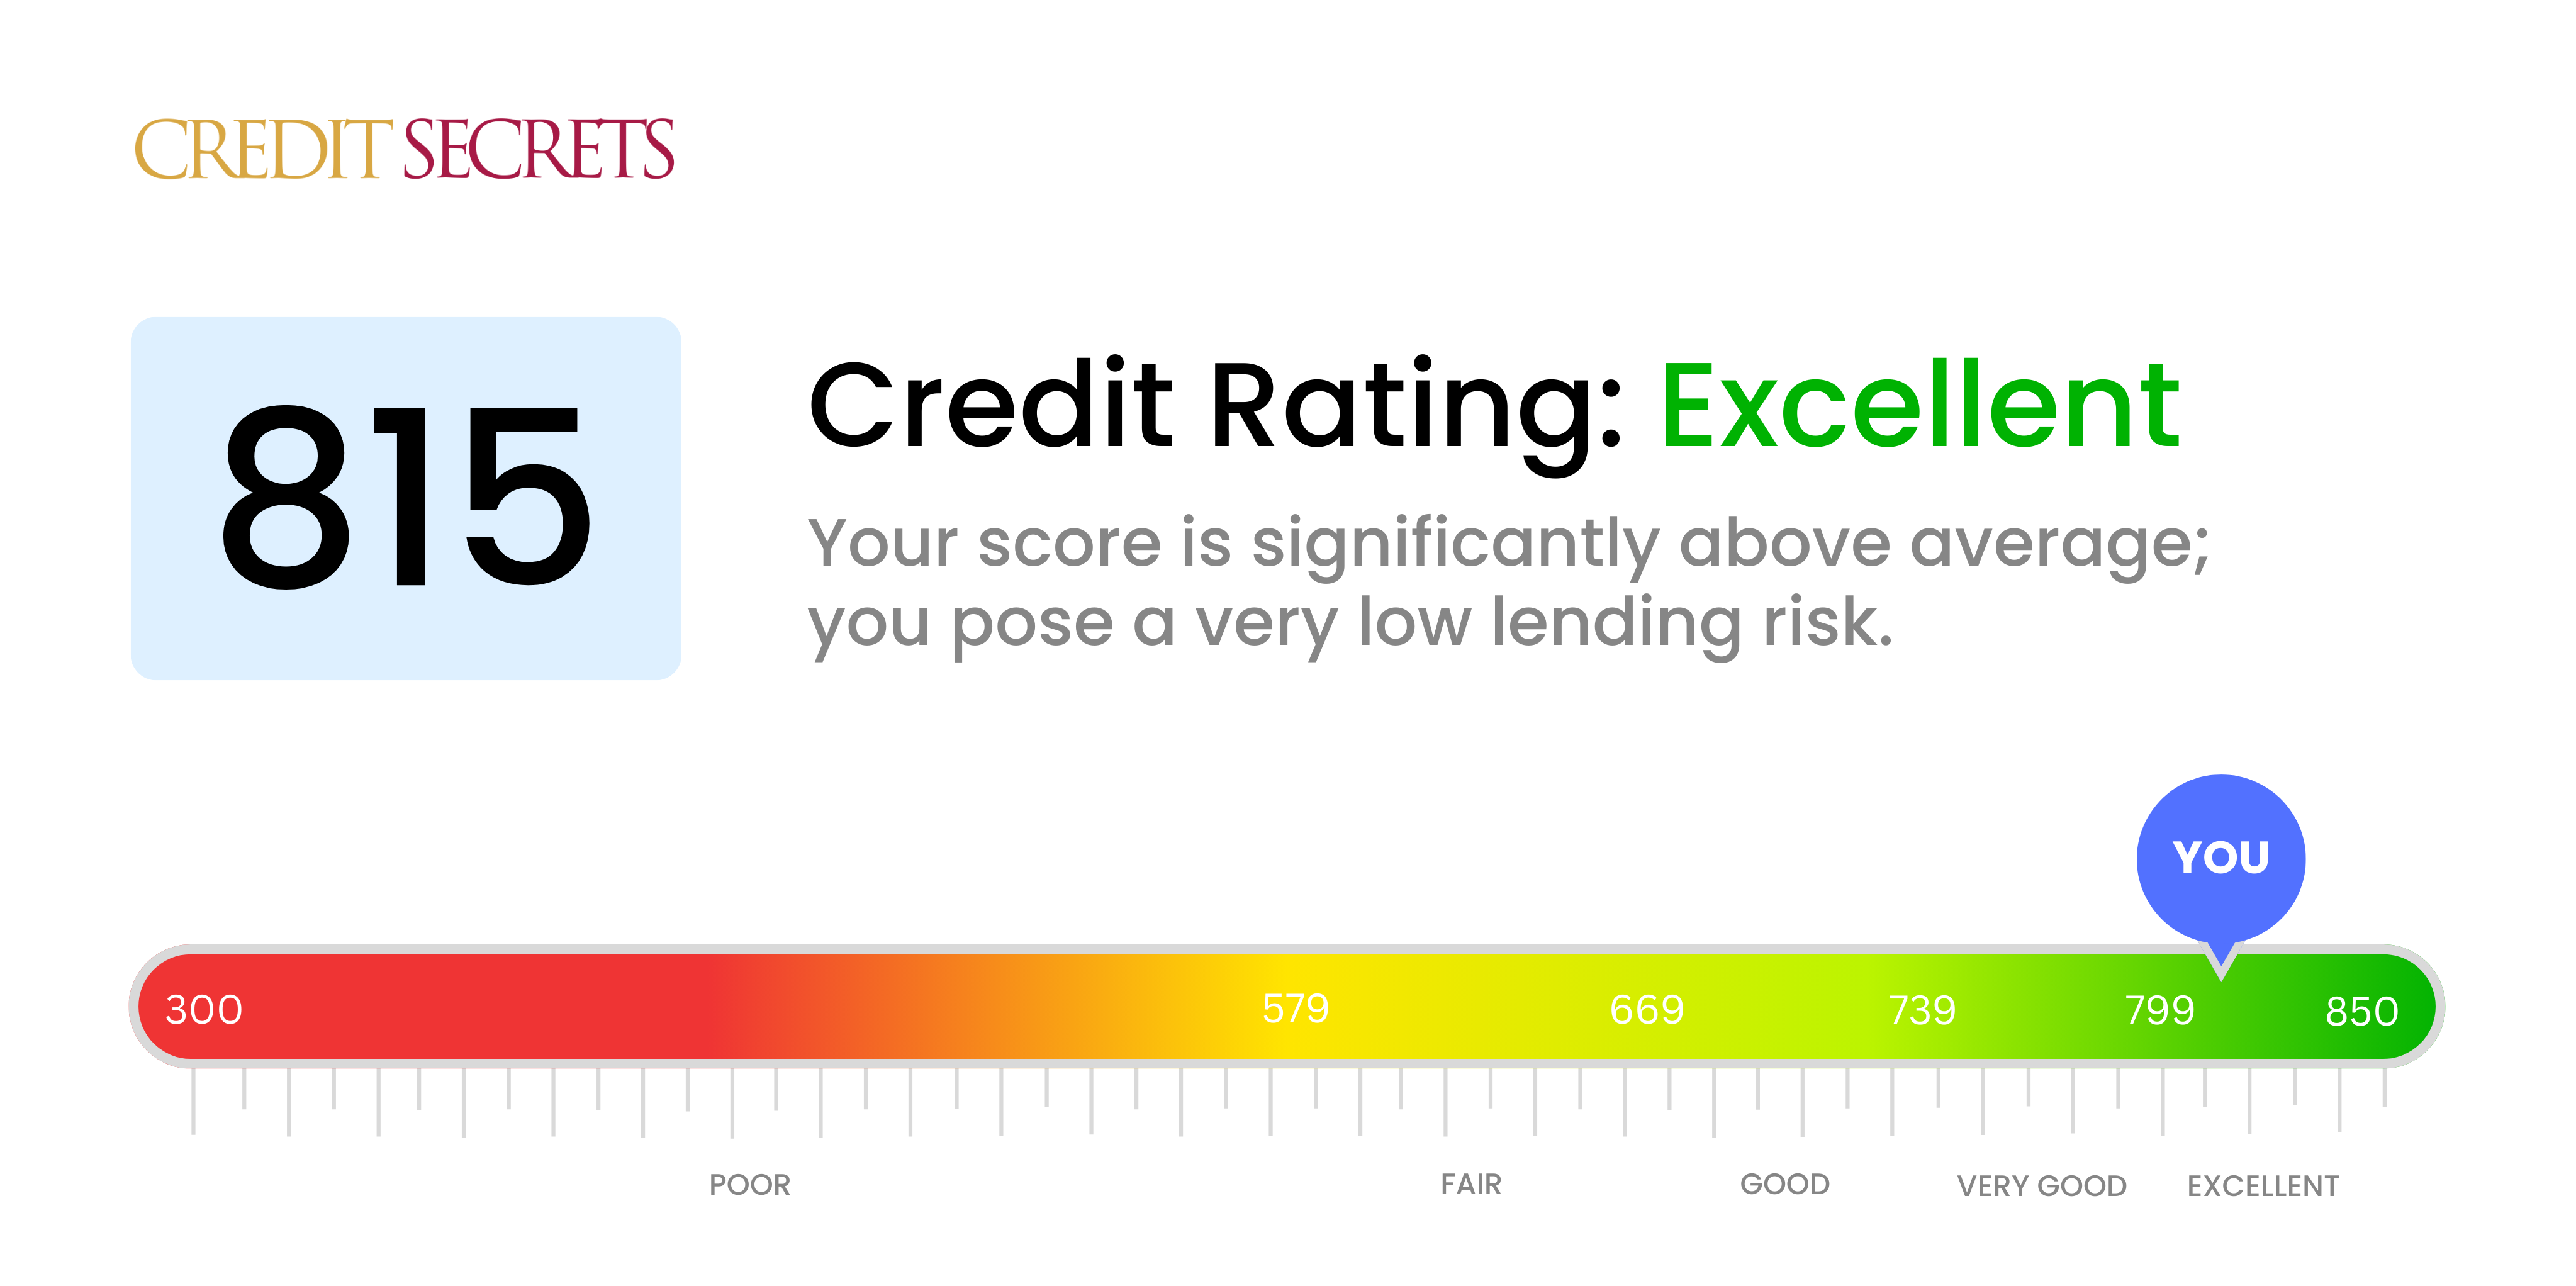 Is 815 a good credit score?